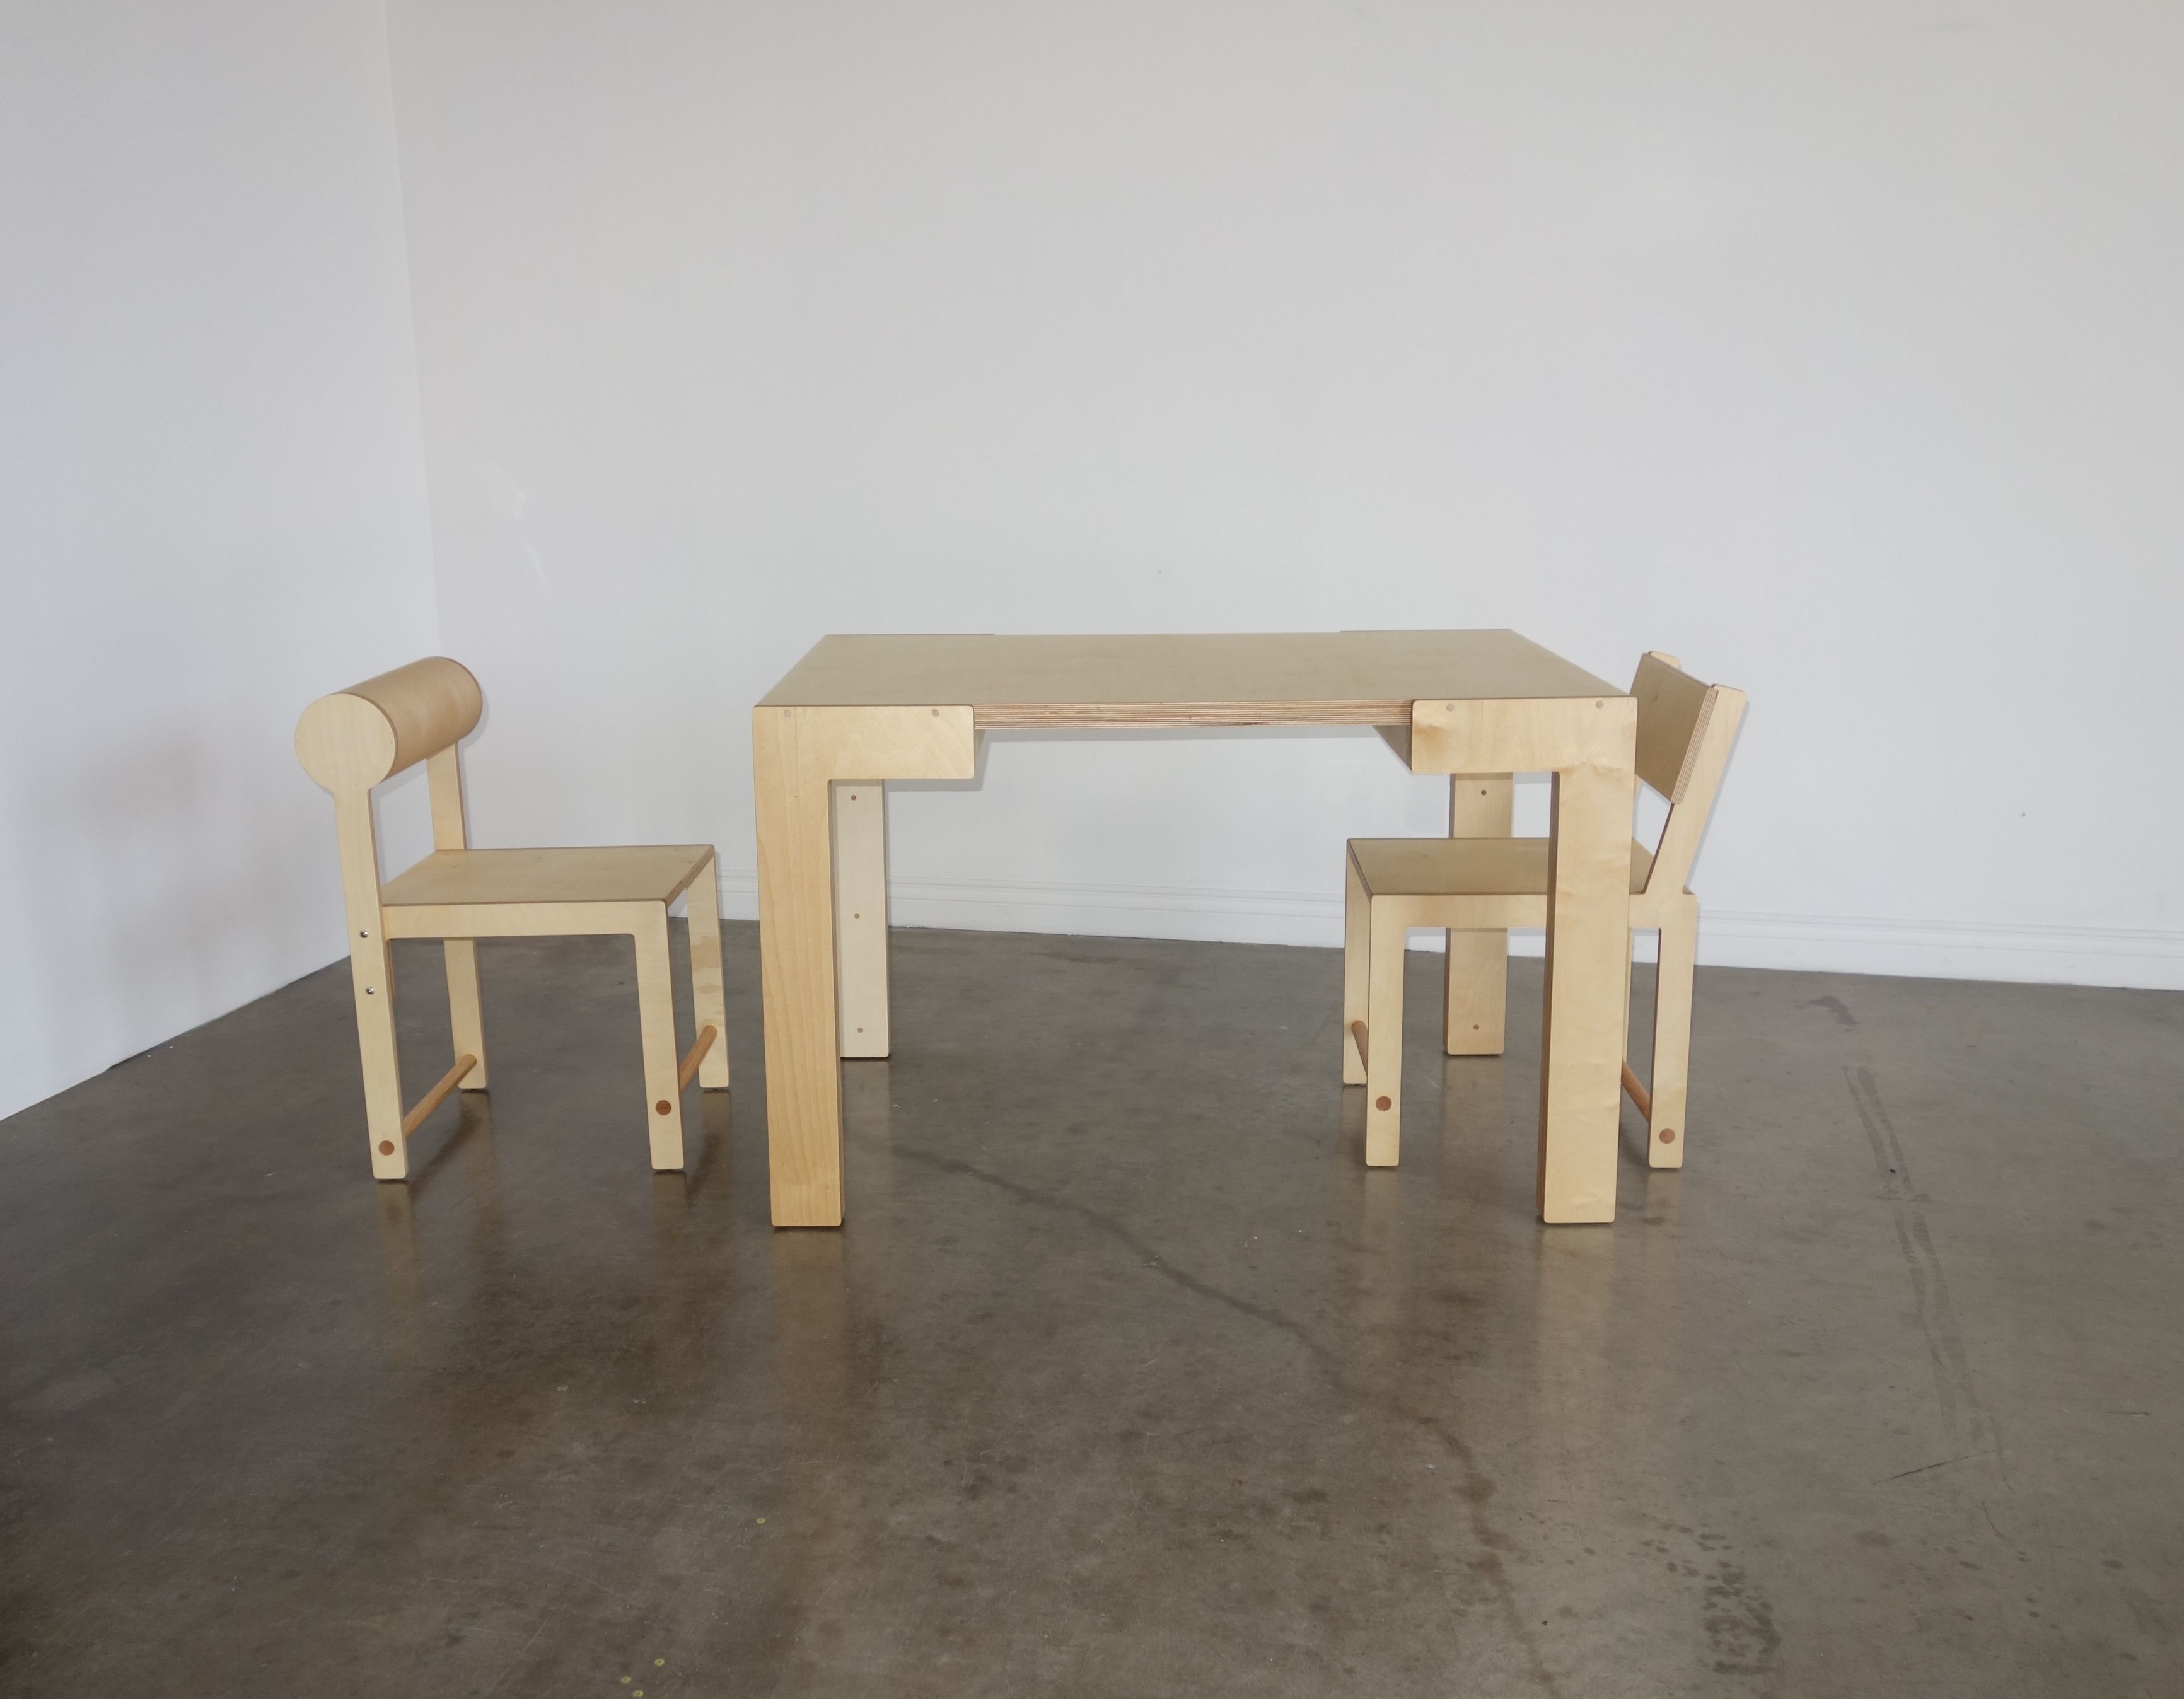  Frame Table - Gallery Yamahon  product image 7